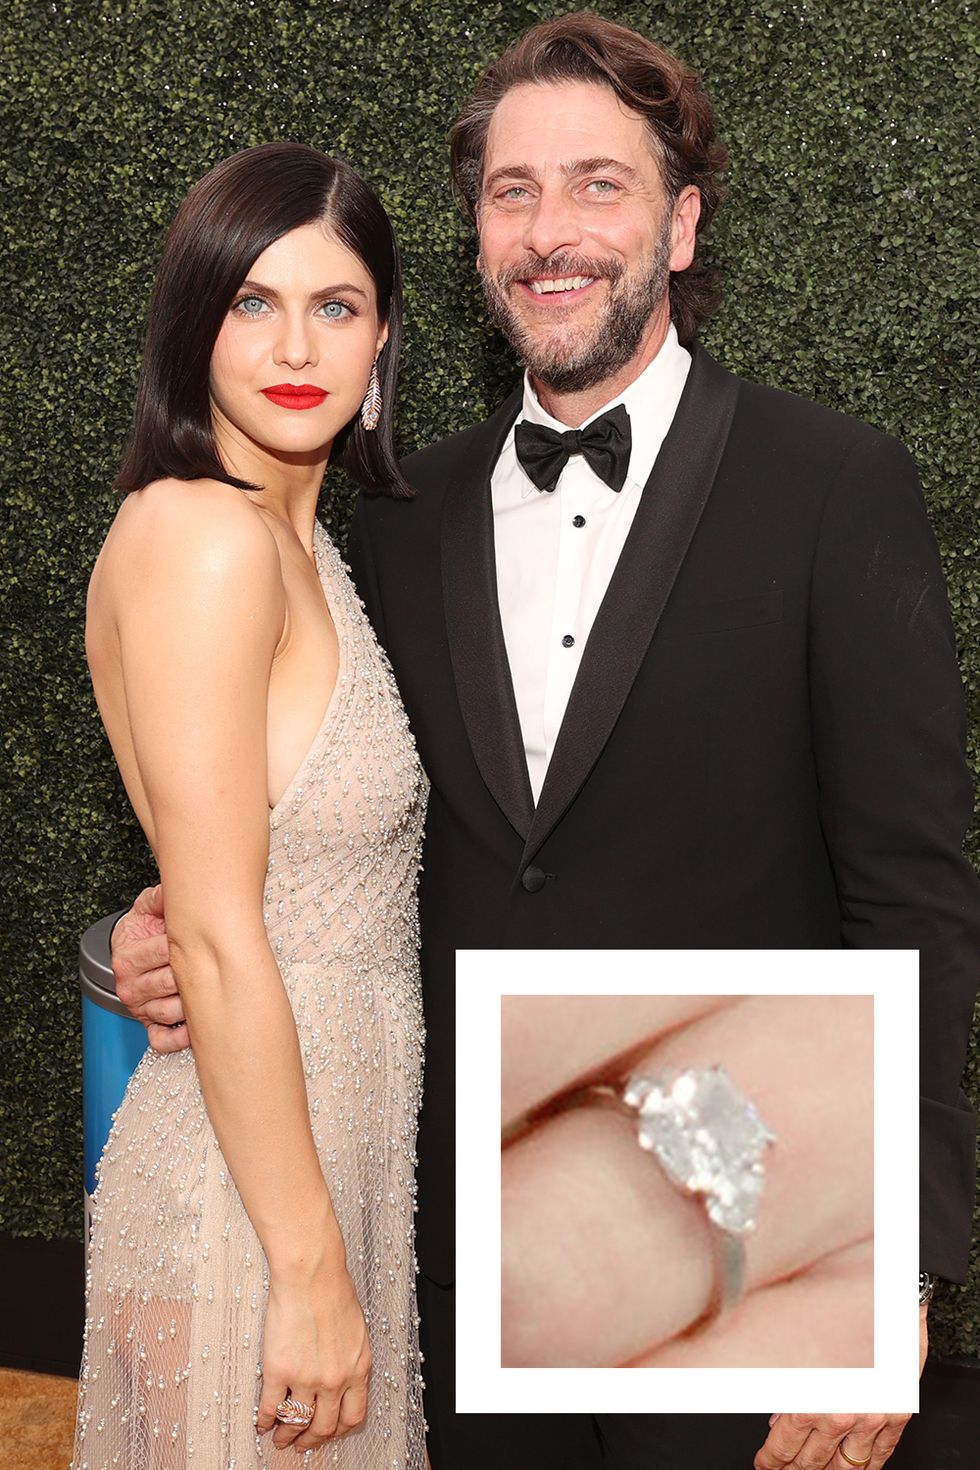 15 Celebrities With Non-Diamond Engagement Rings